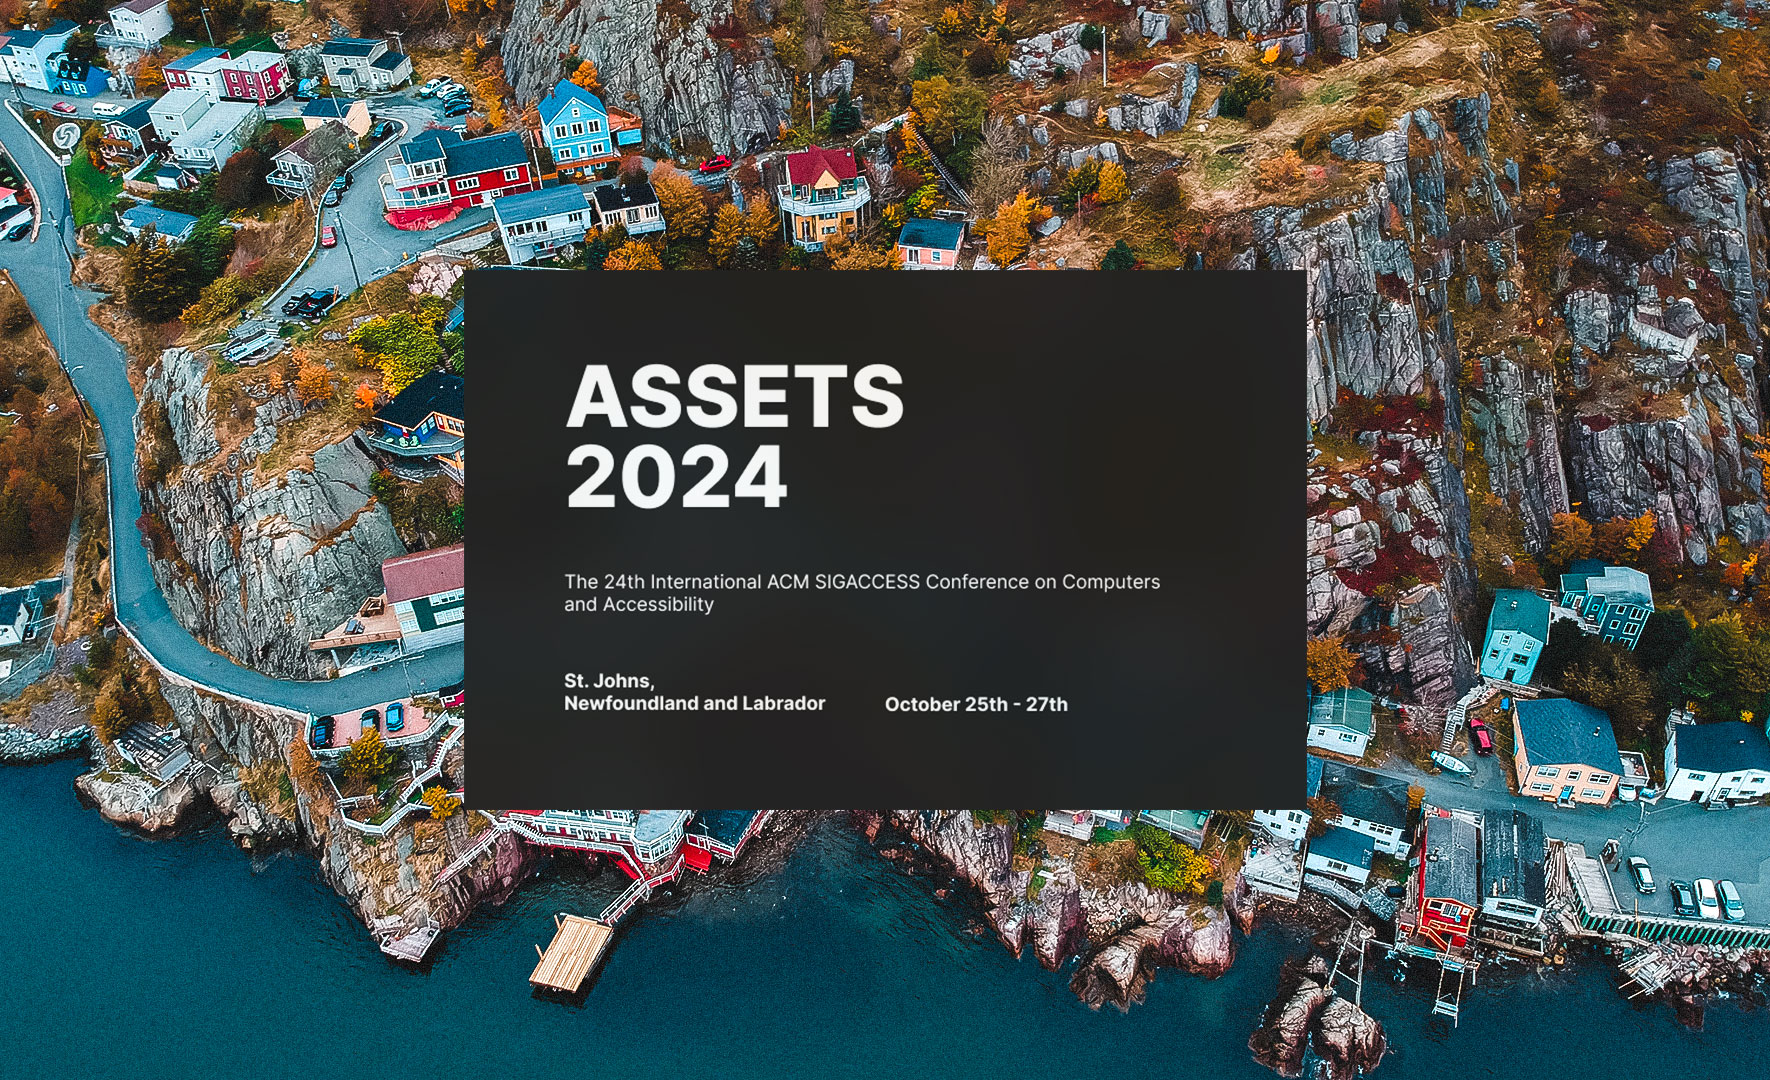 A screenshot of the ASSETS 2024 website. On a background of St. John's Newfoundland, there is a semi-translucent black box which says in all capital letters ASSETS 2024.